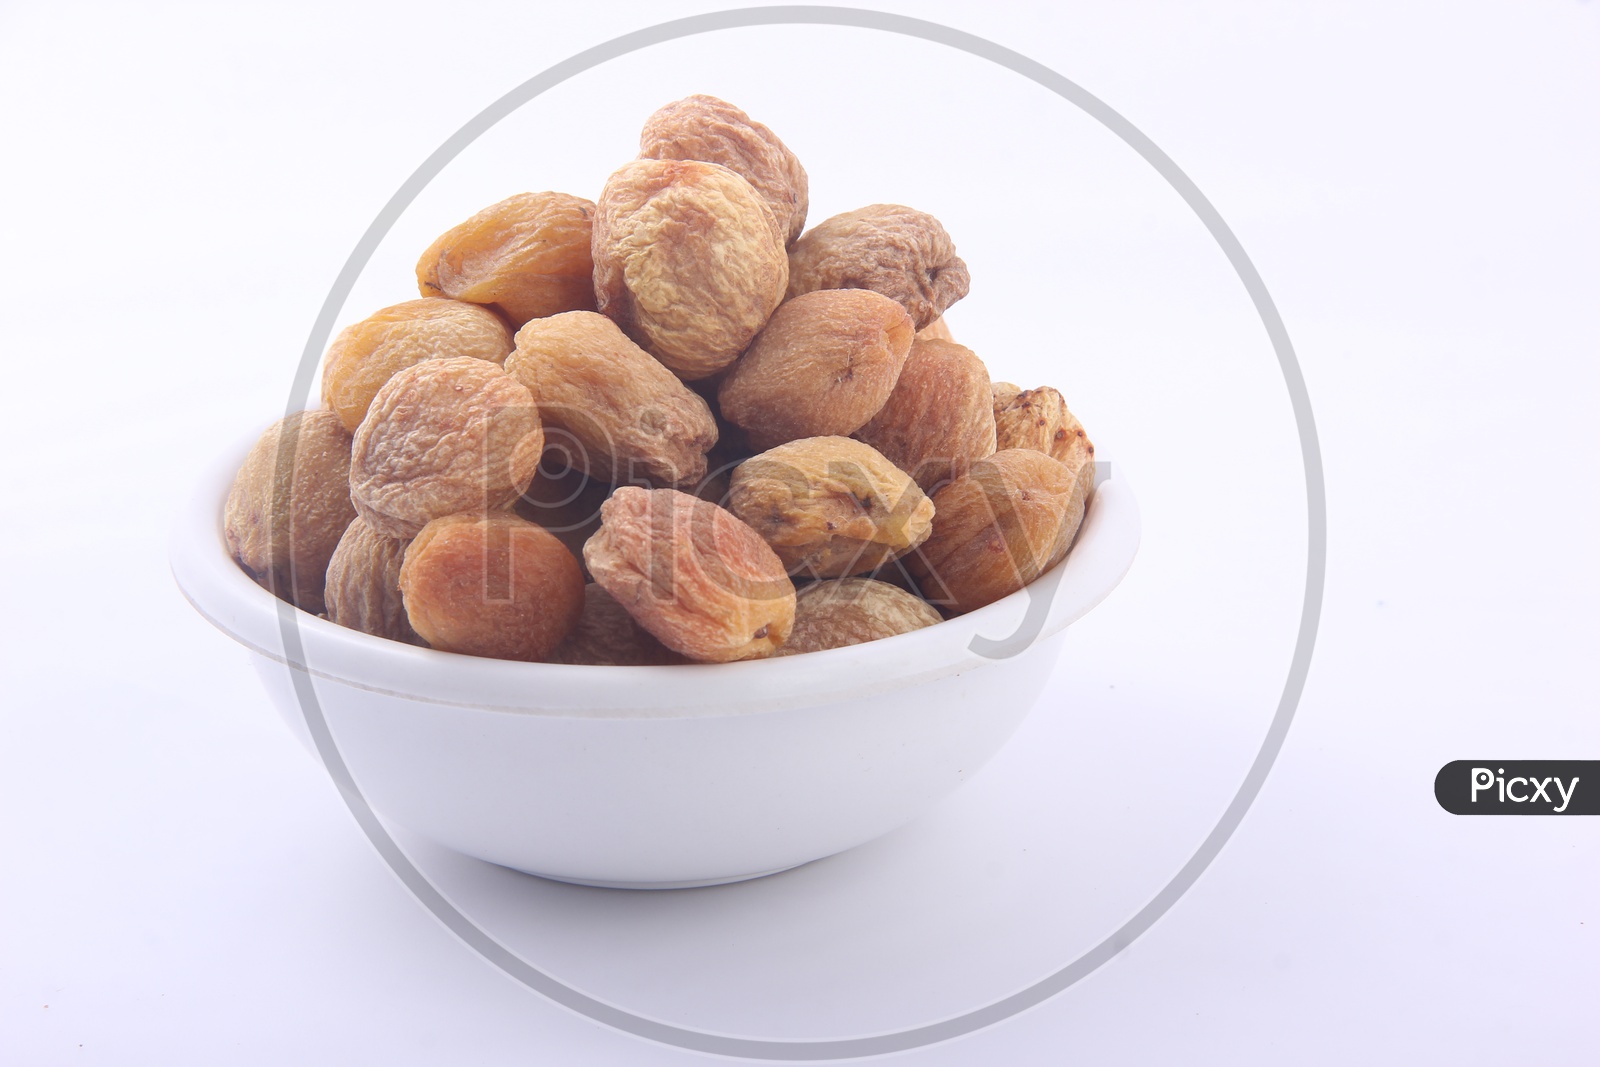 Organically Dried Apricots in a Bowl  Isolated on a White Background